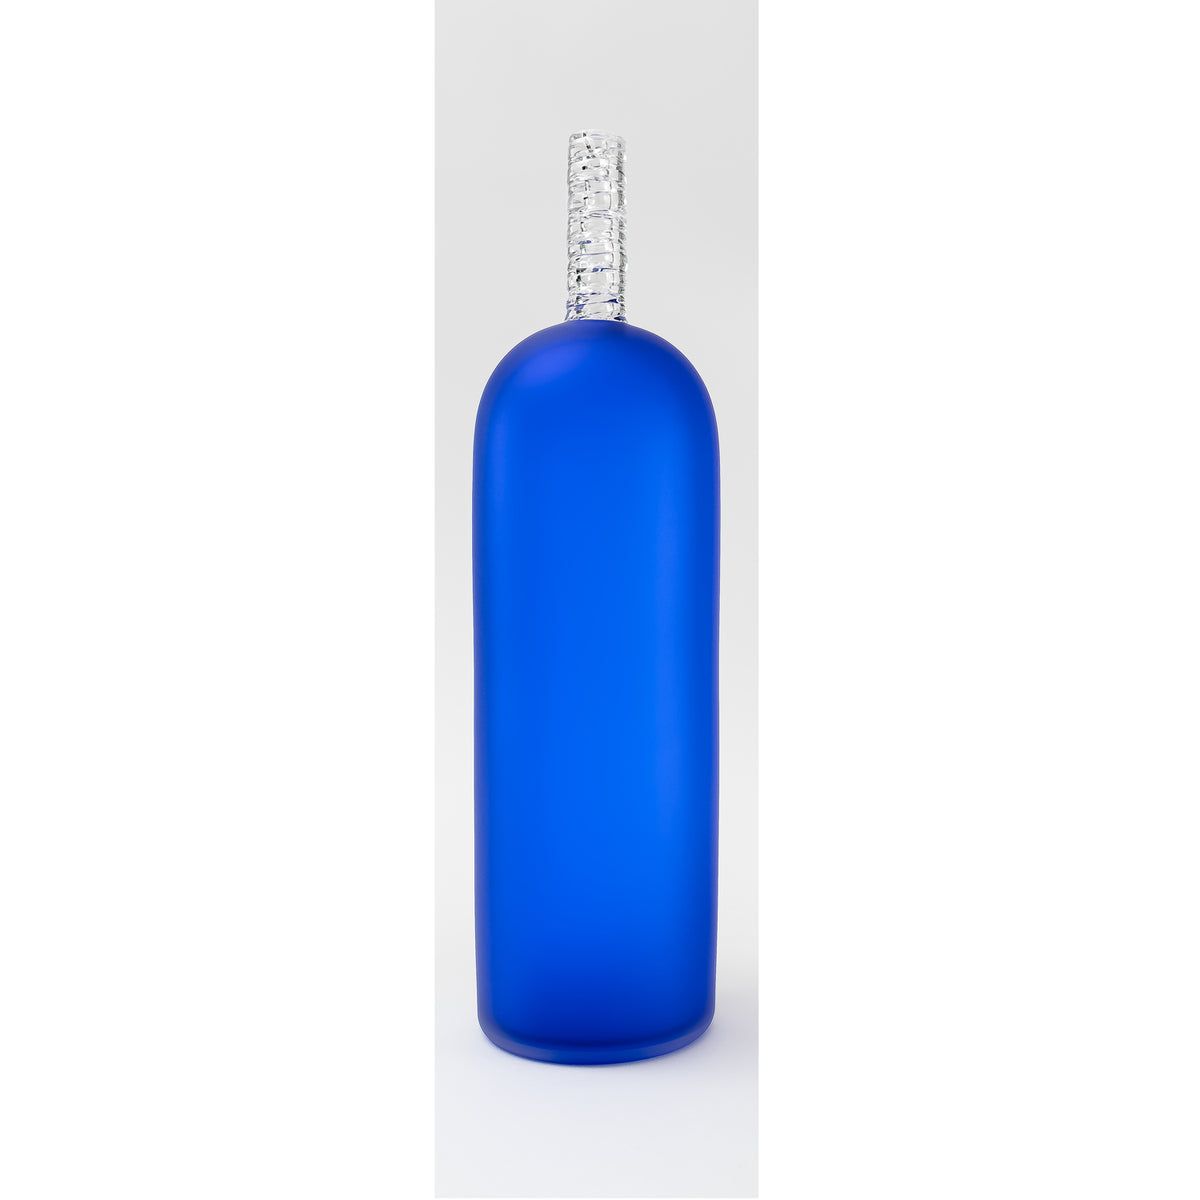 Jaan Andres-Potions Sari Blue Lrg Wine Bottle